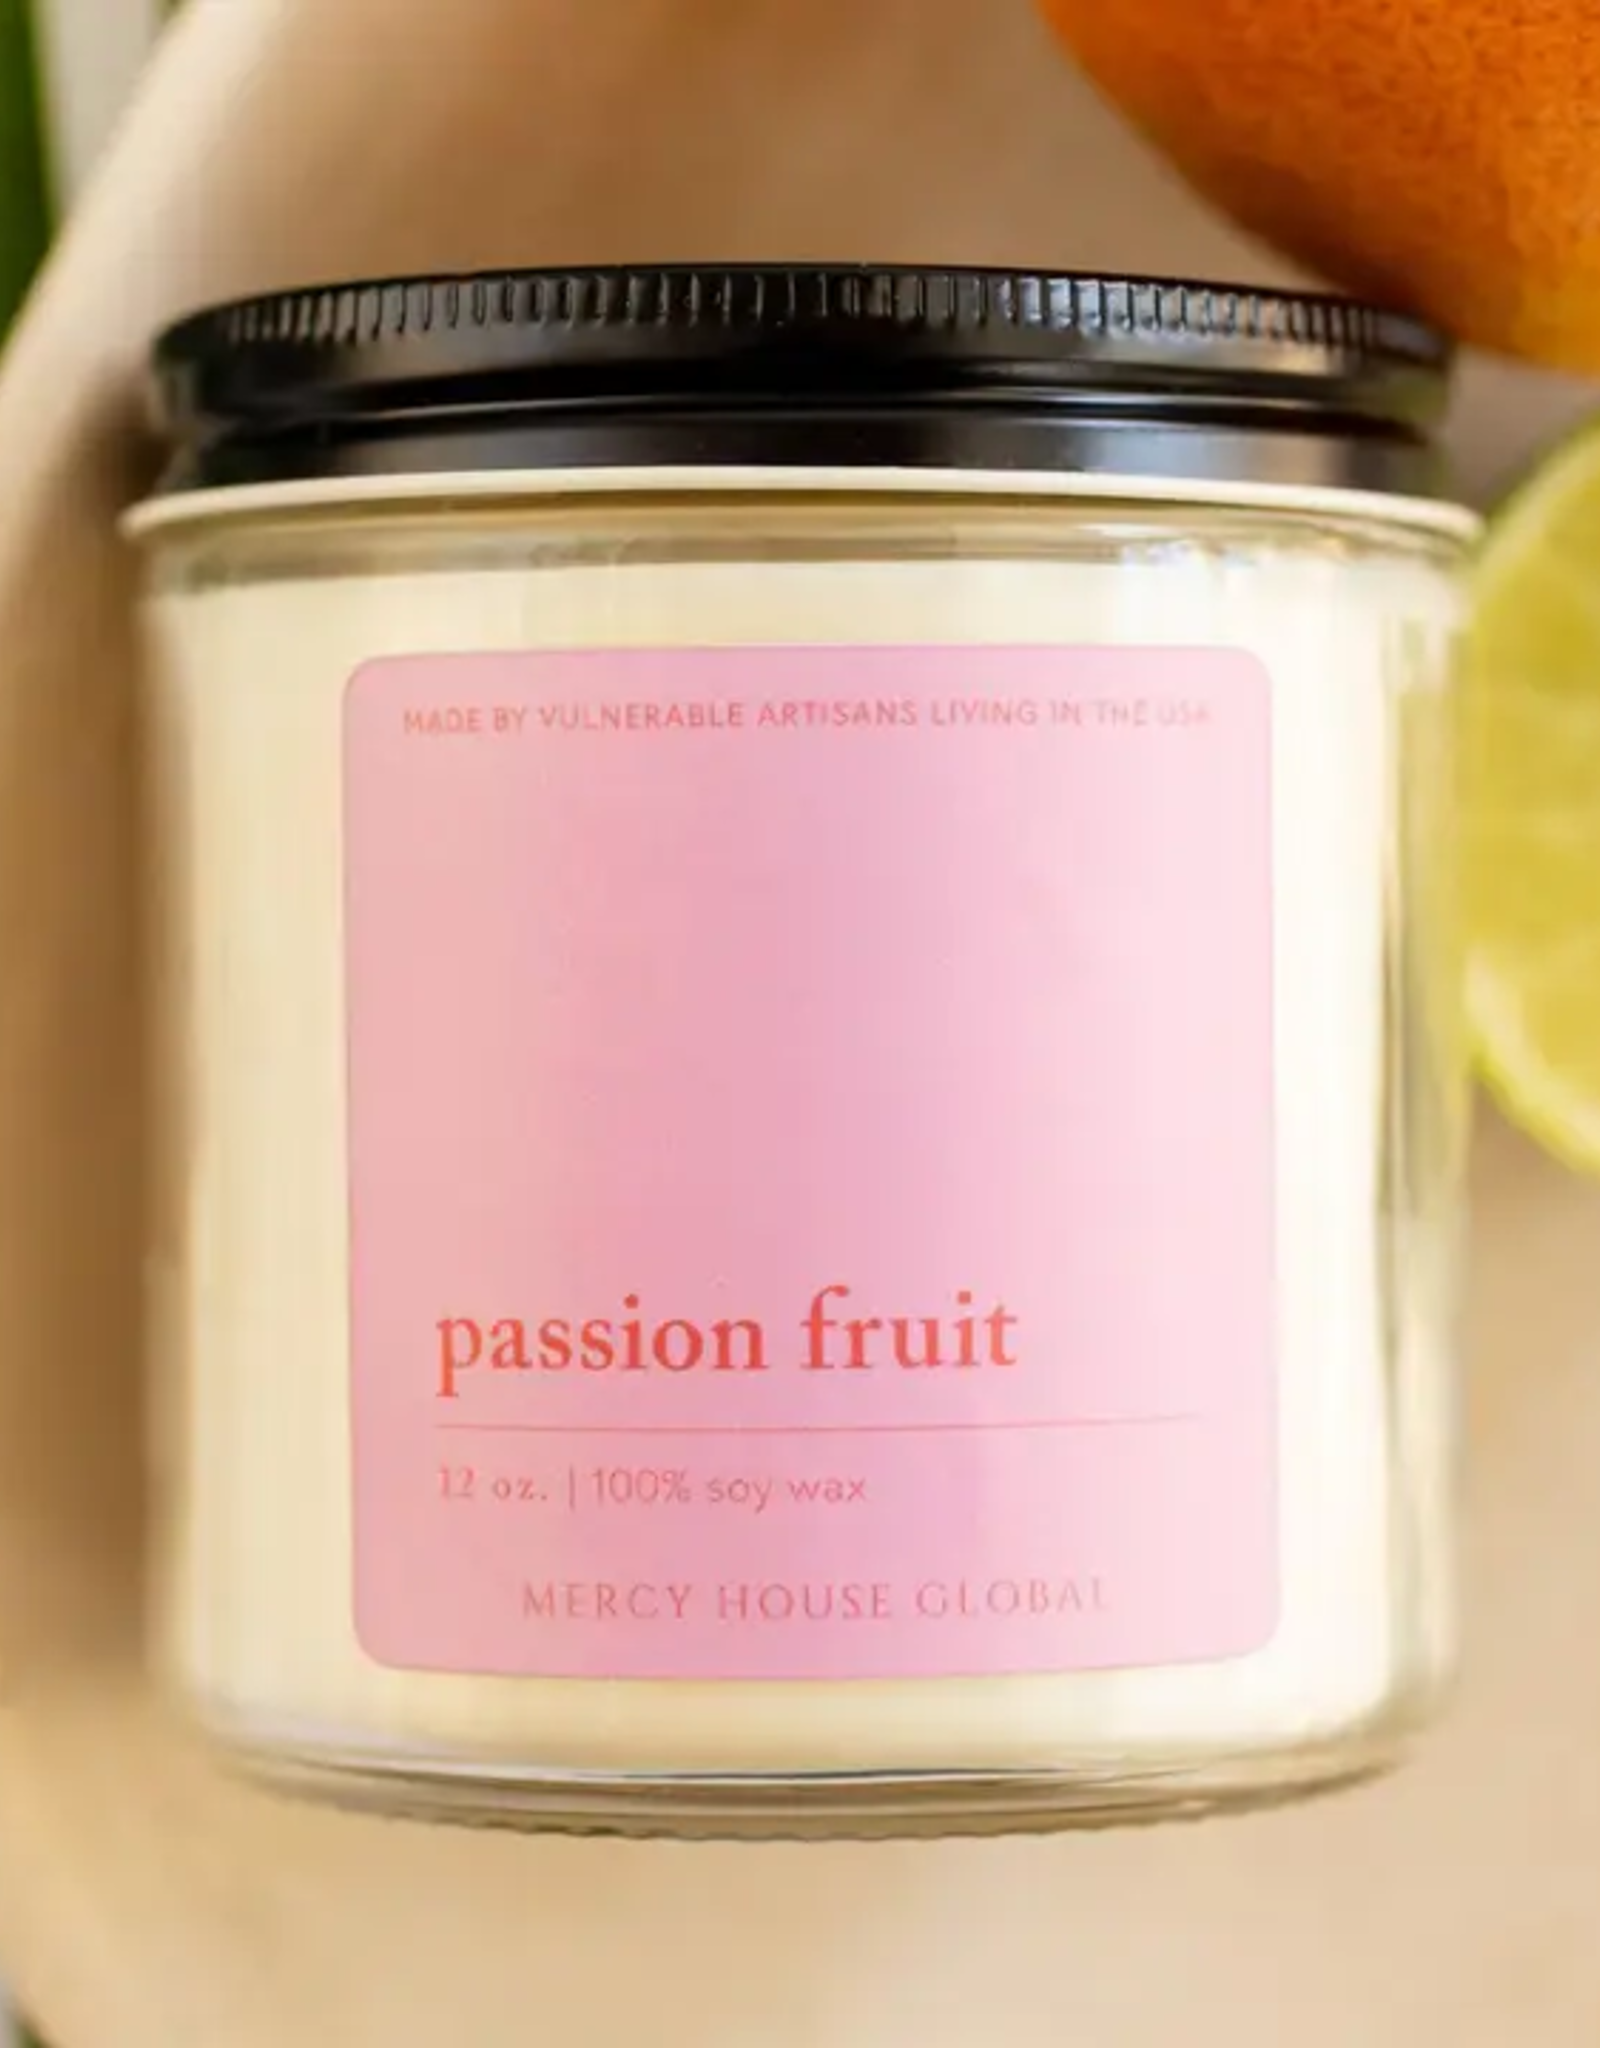 Mercy House Global Mercy House Global - Passion Fruit Candle